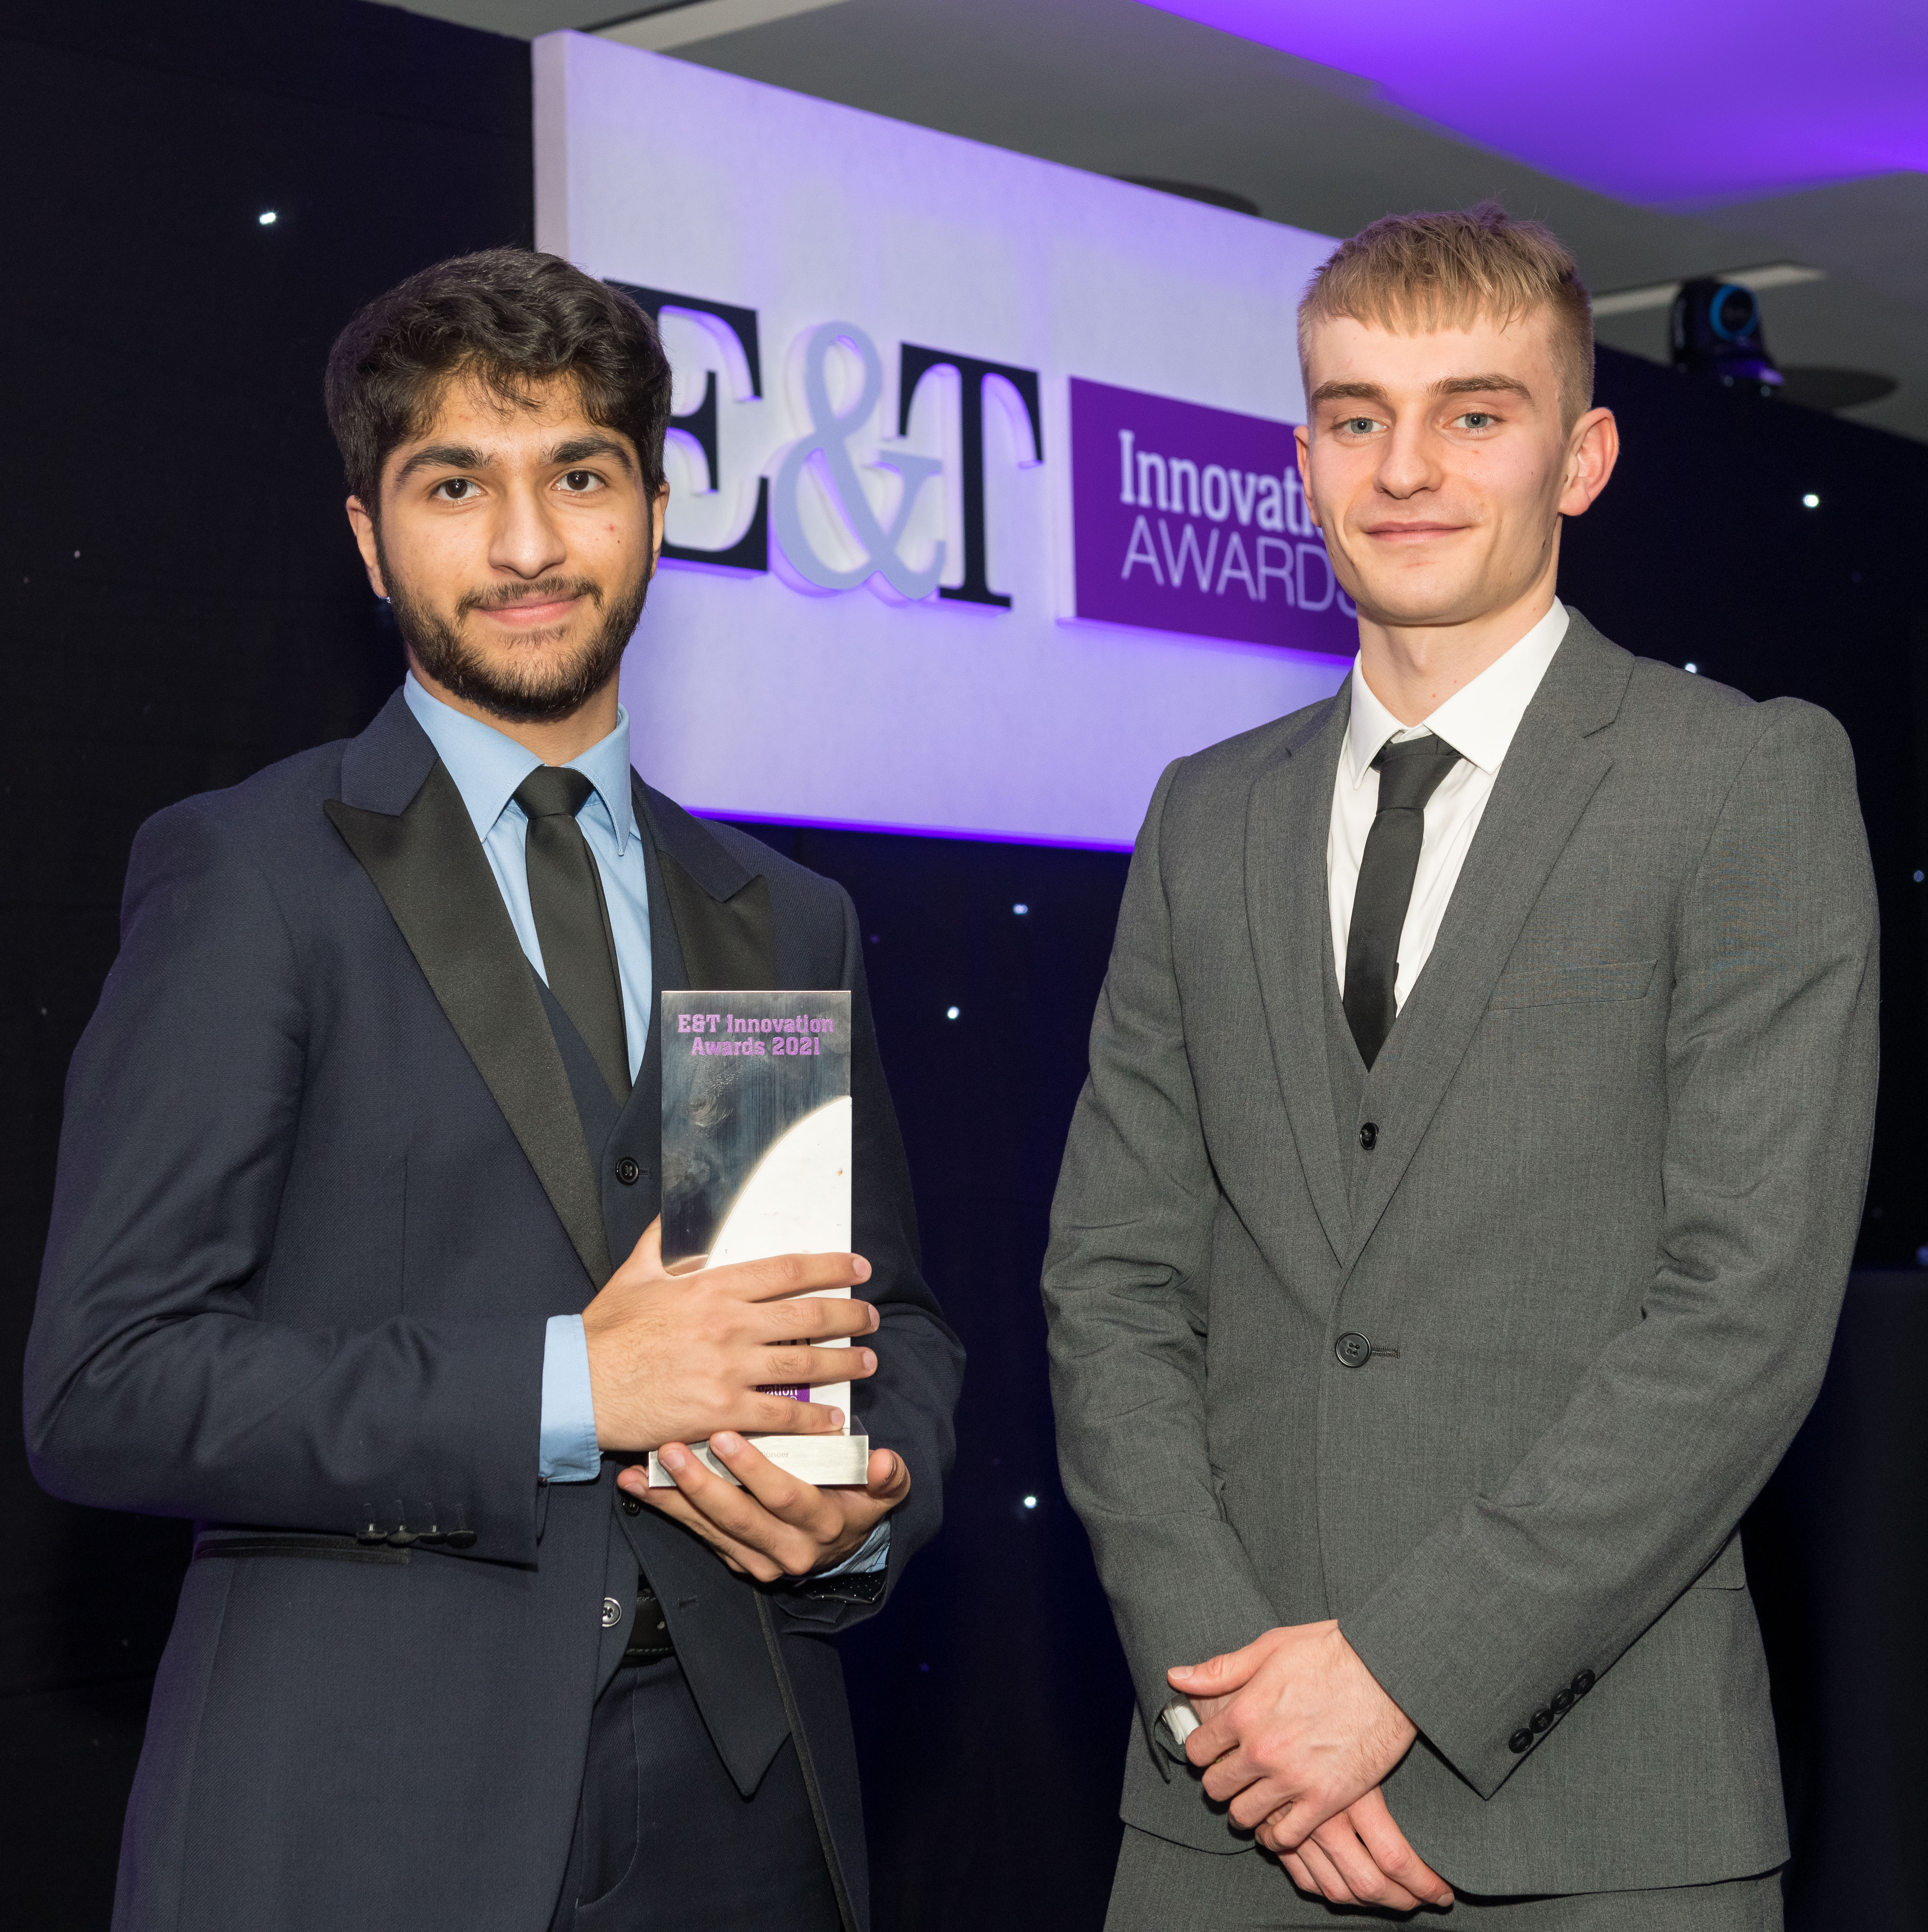 Calling all young pioneers - enter the E&T awards now for free!